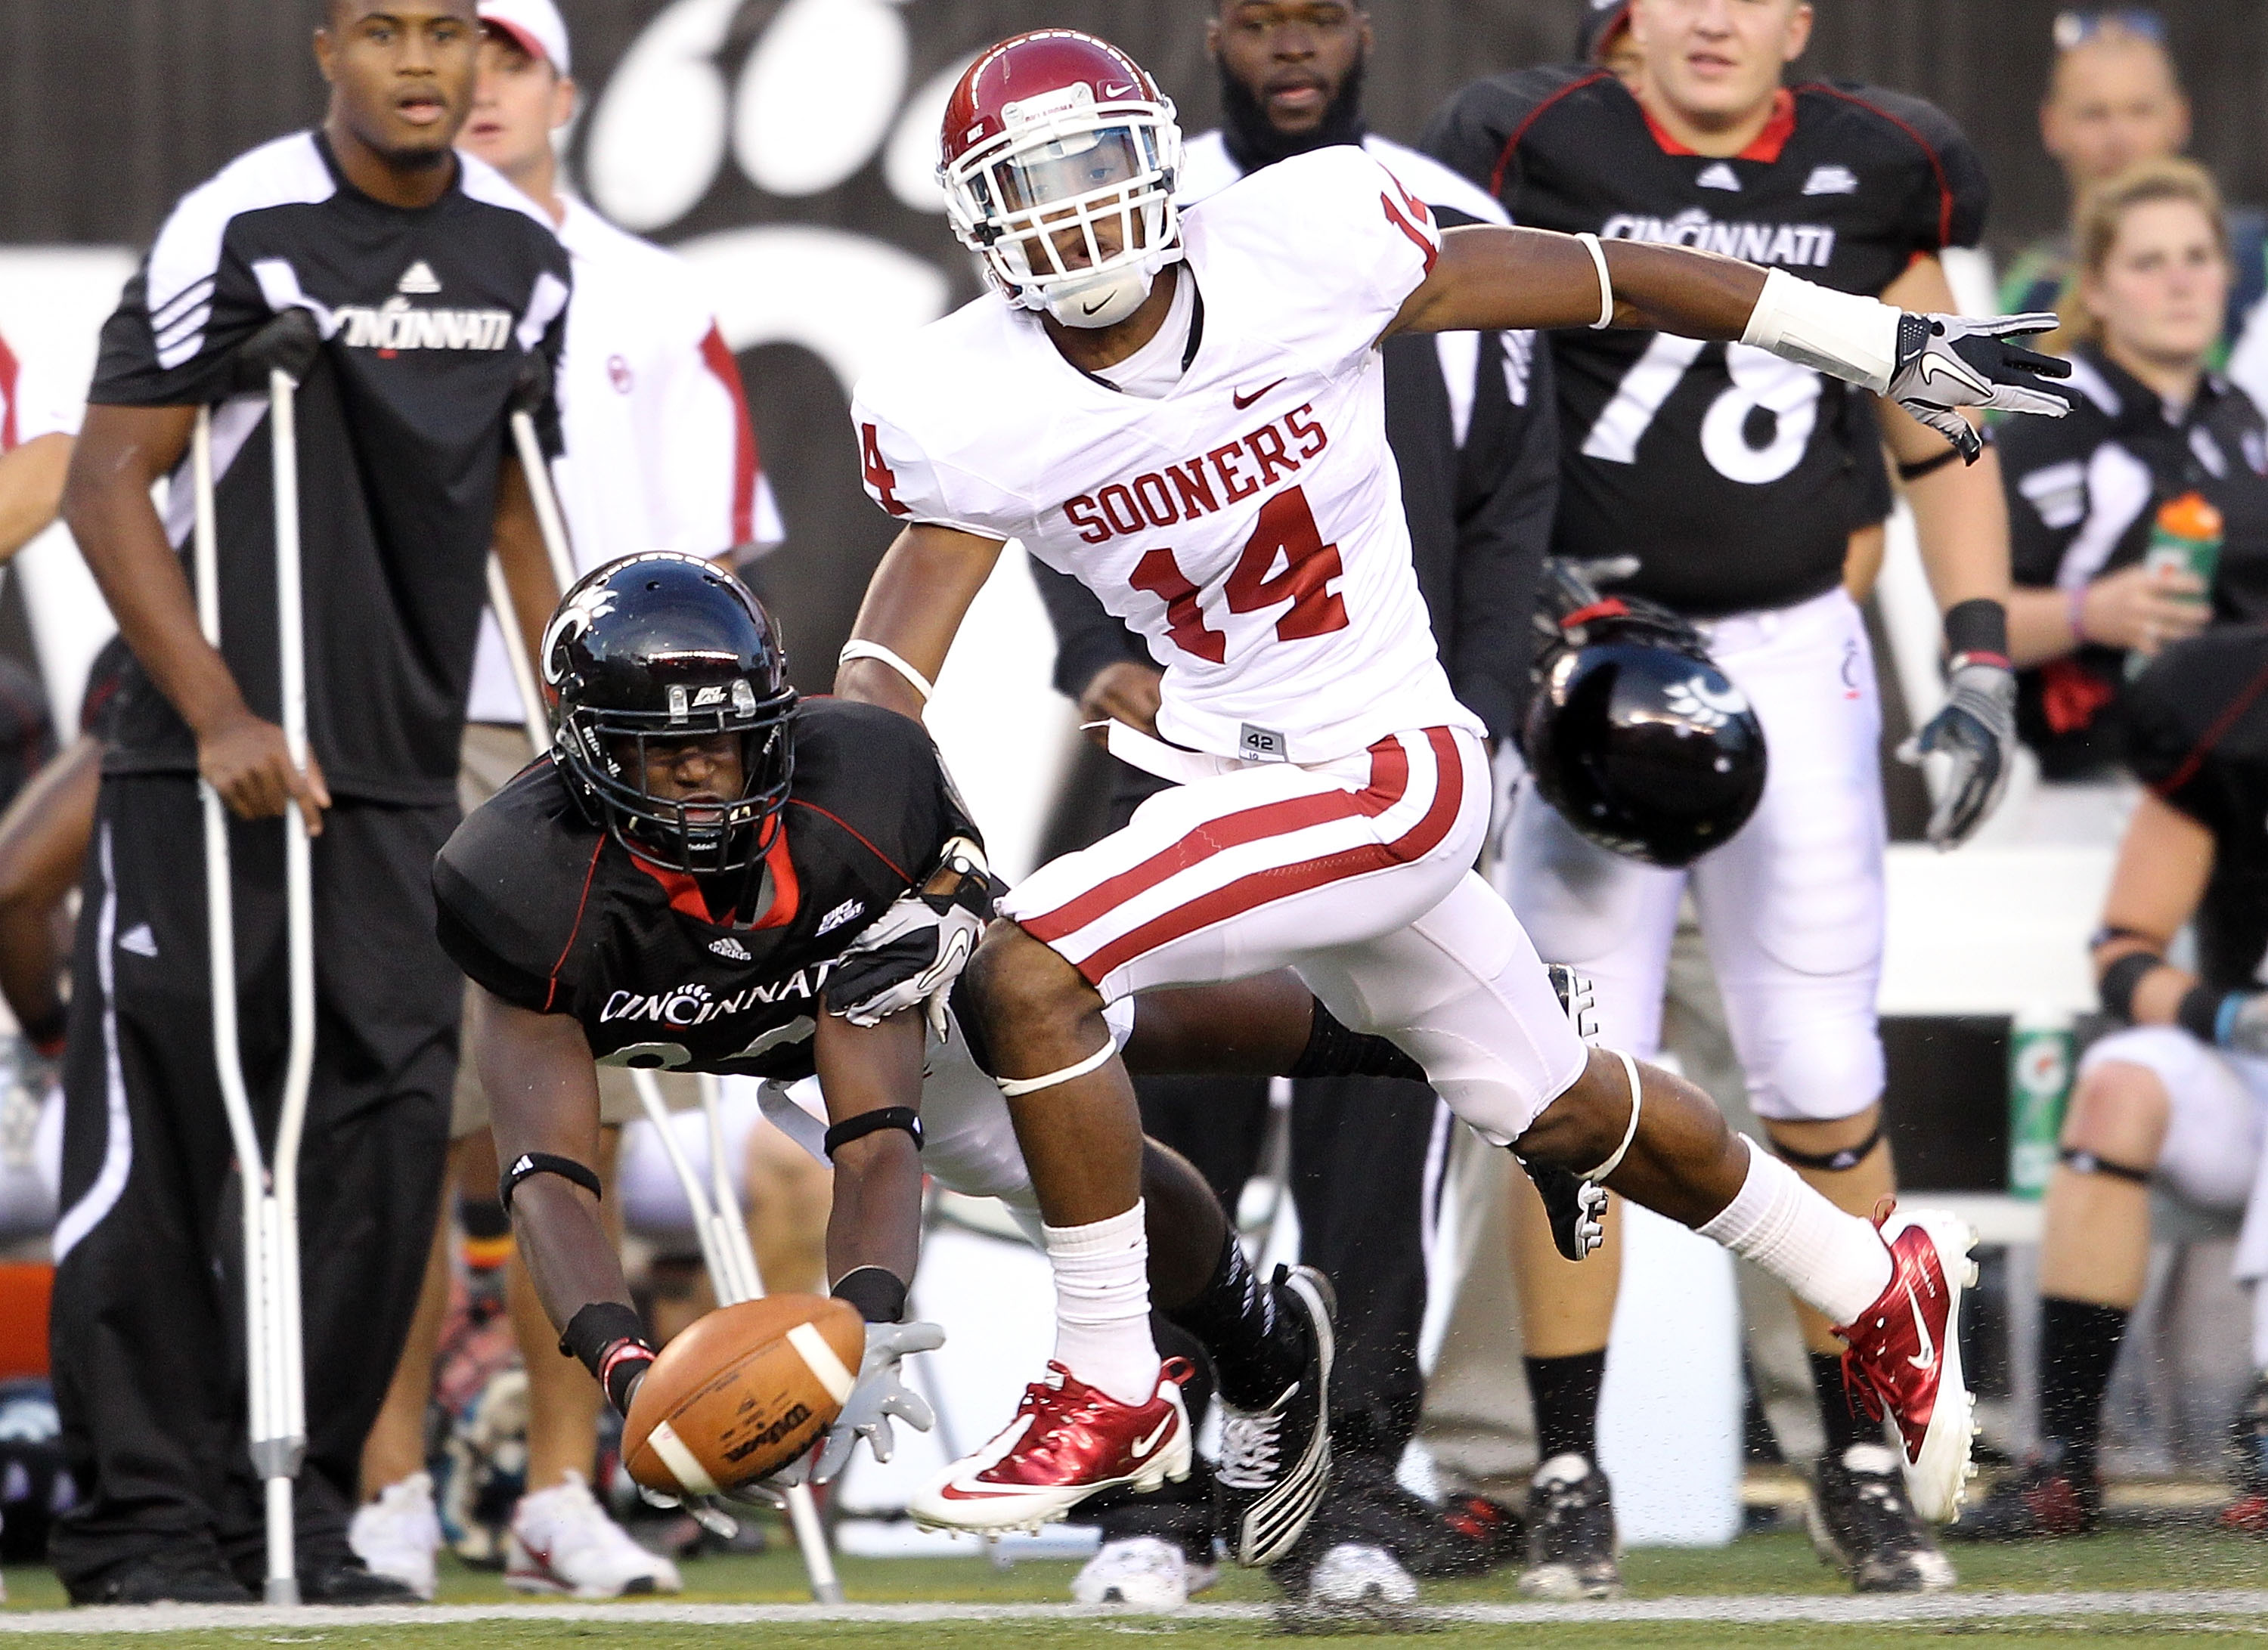 CINCINNATI - SEPTEMBER 25:  Armon Binns #80 of the Cincinnati Bearcats reaches up for a pass while defended by Aaron Colvin #14 of the Oklahoma Sooners during the game at Paul Brown Stadium on September 25, 2010 in Cincinnati, Ohio. The pass fell incomple